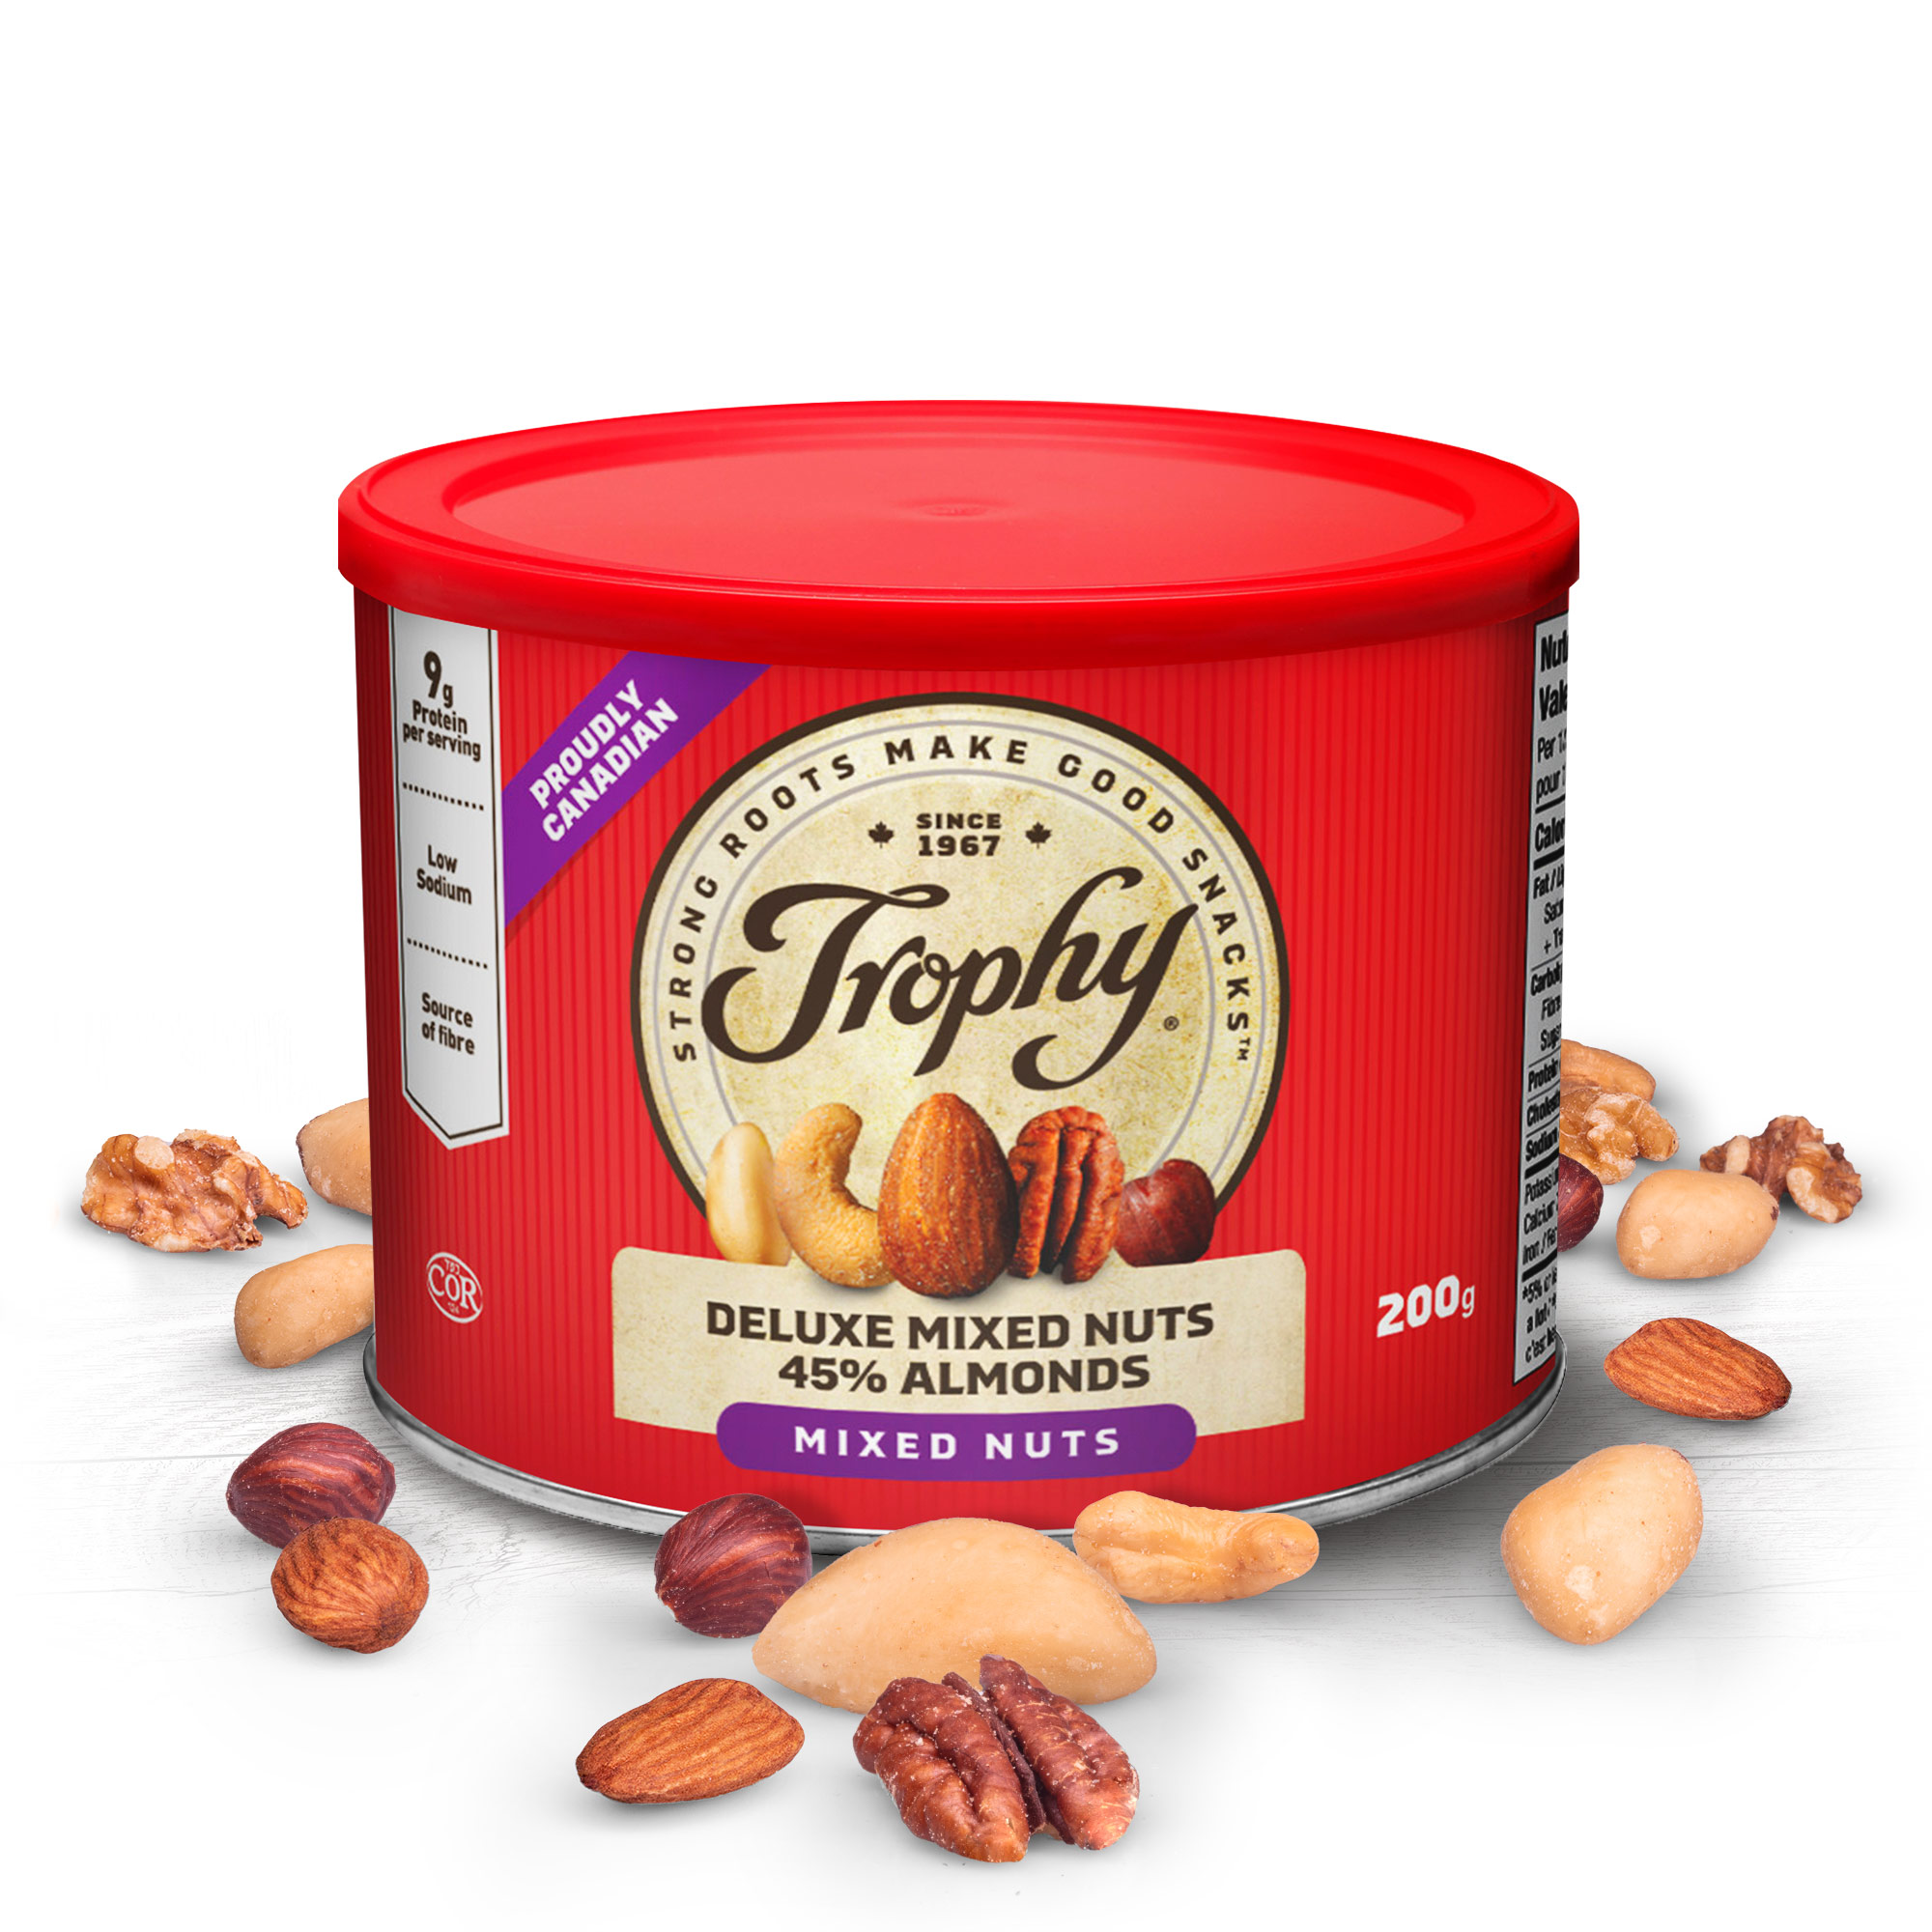 Deluxe Mixed Nuts 45% Almonds